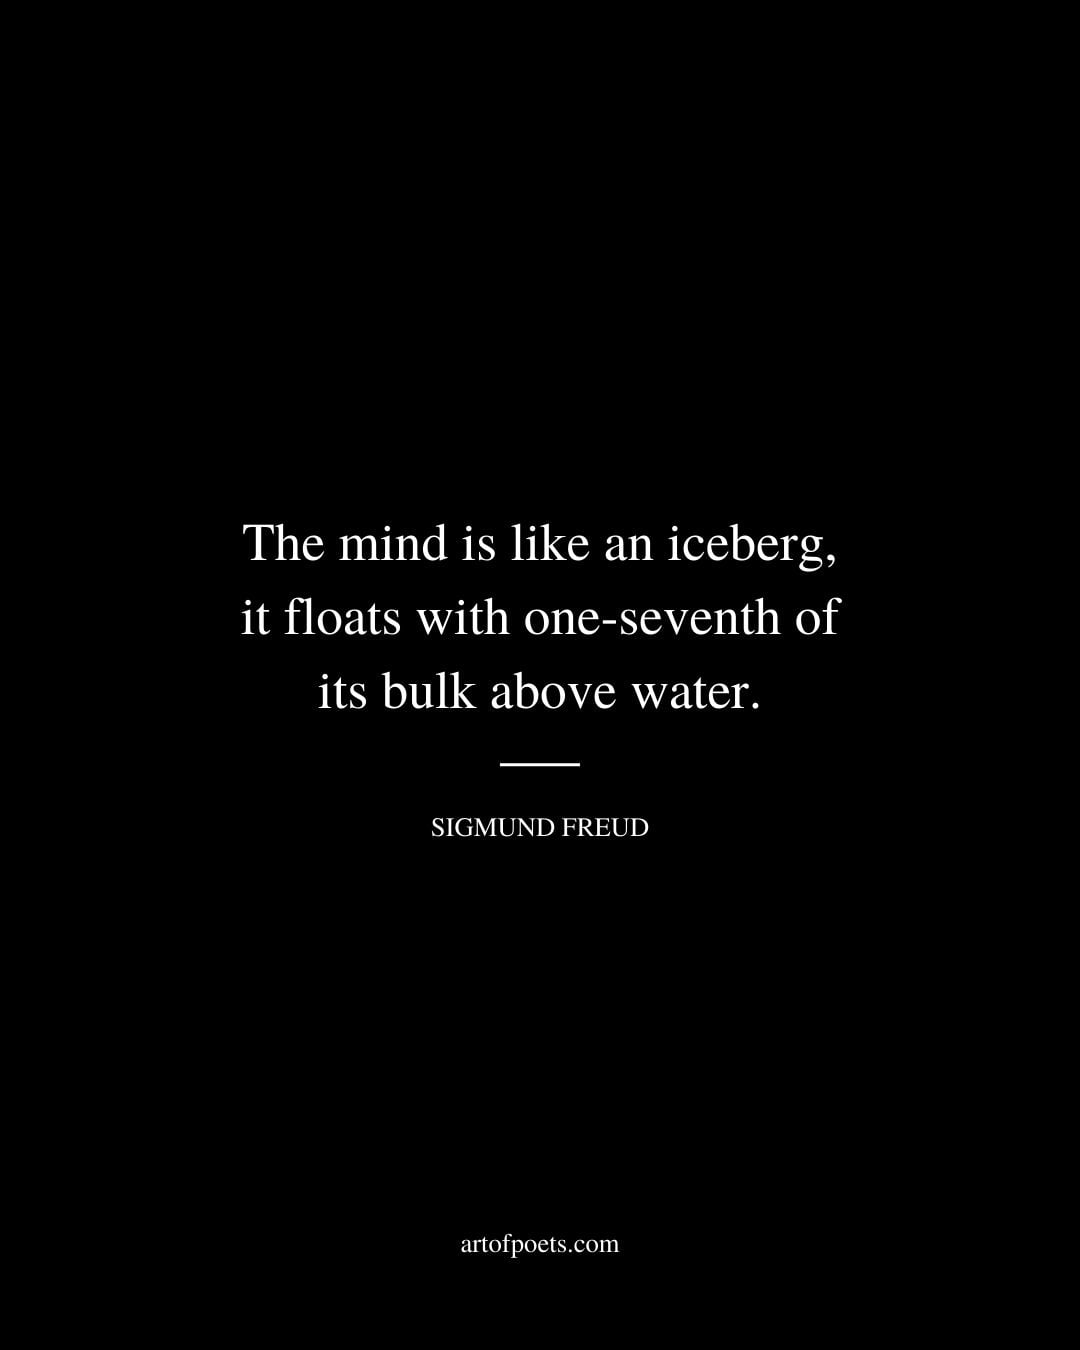 The mind is like an iceberg it floats with one seventh of its bulk above water